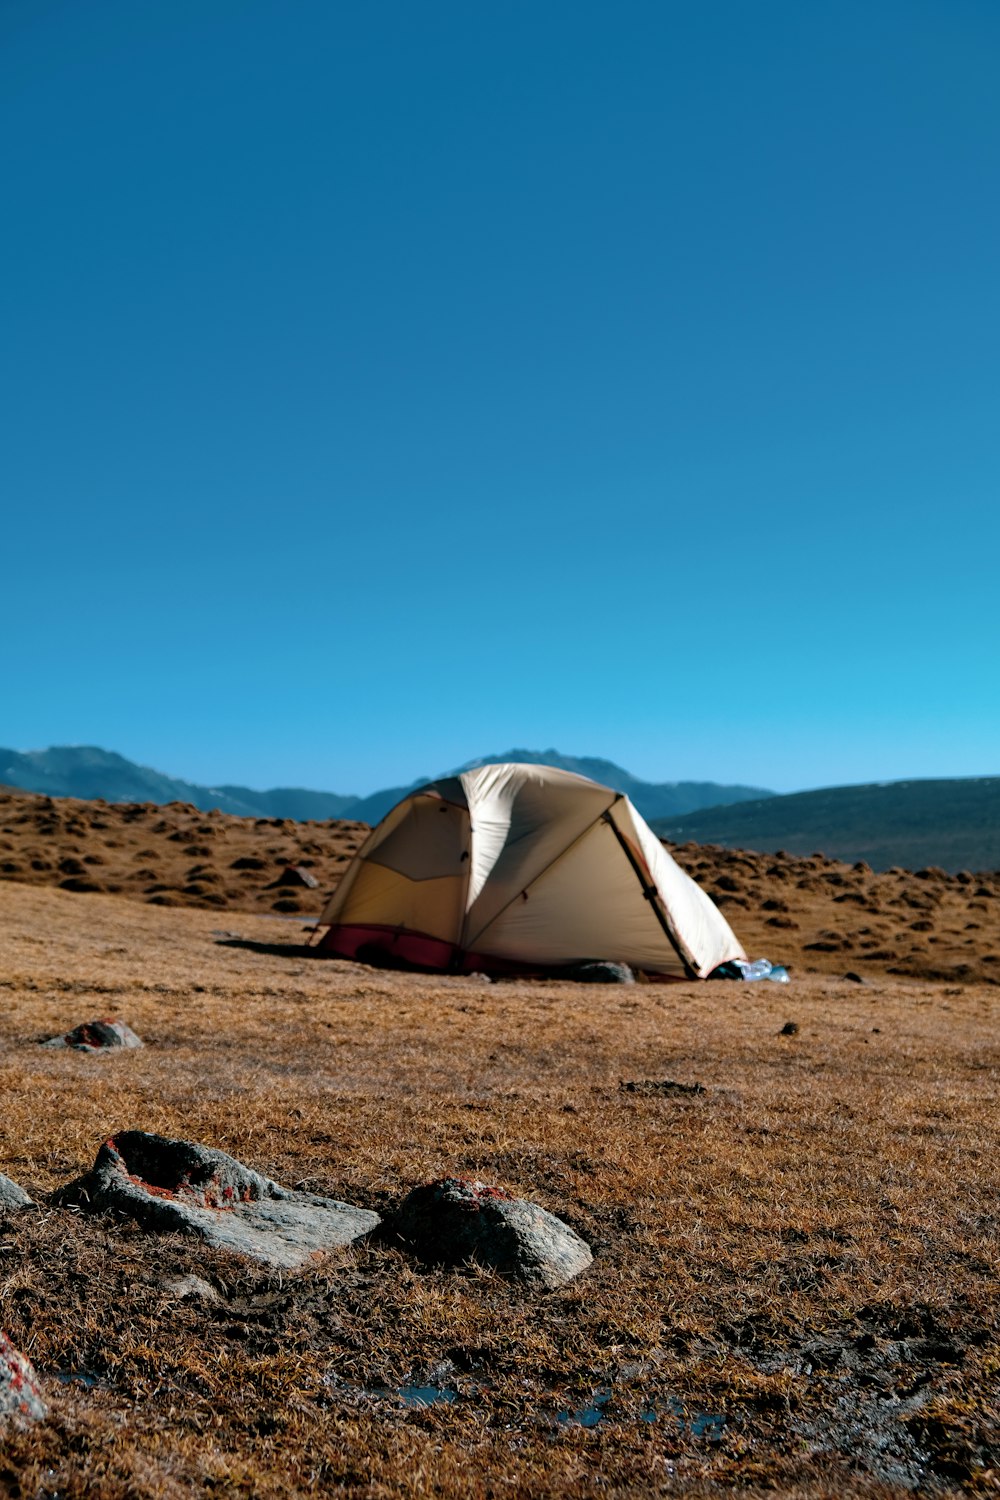 white and gray tent on brown sand under blue sky during daytime